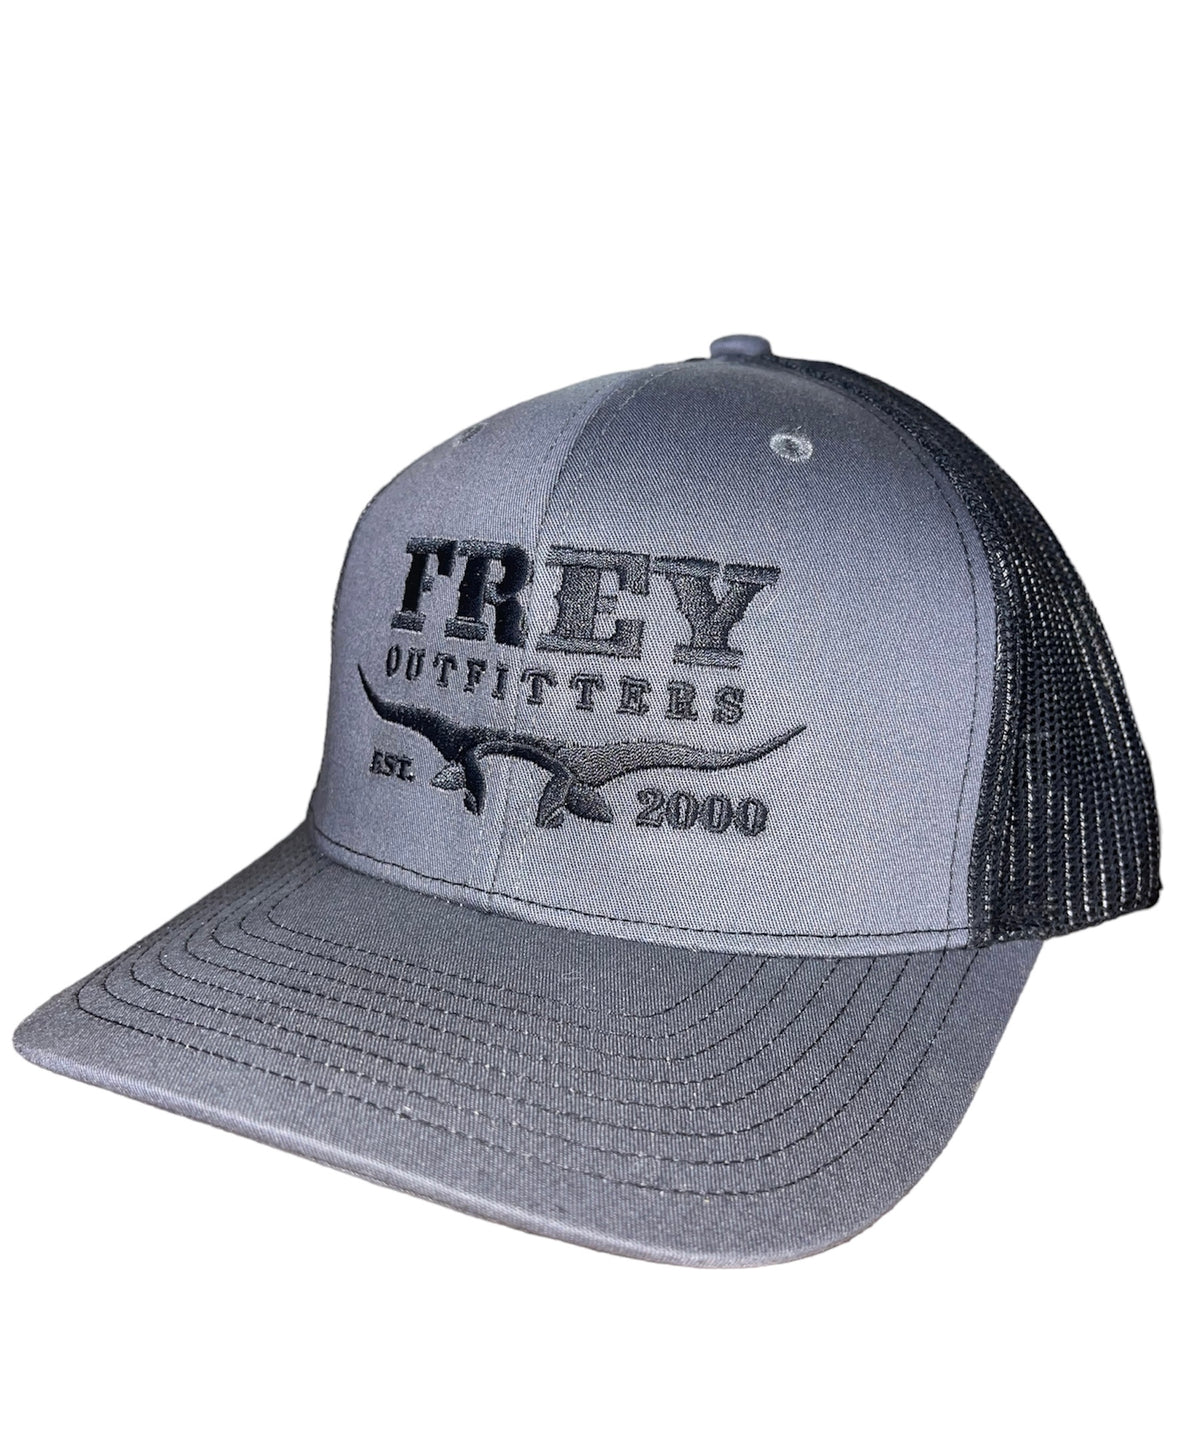 Frey Outfitters Charcoal/Black Cap